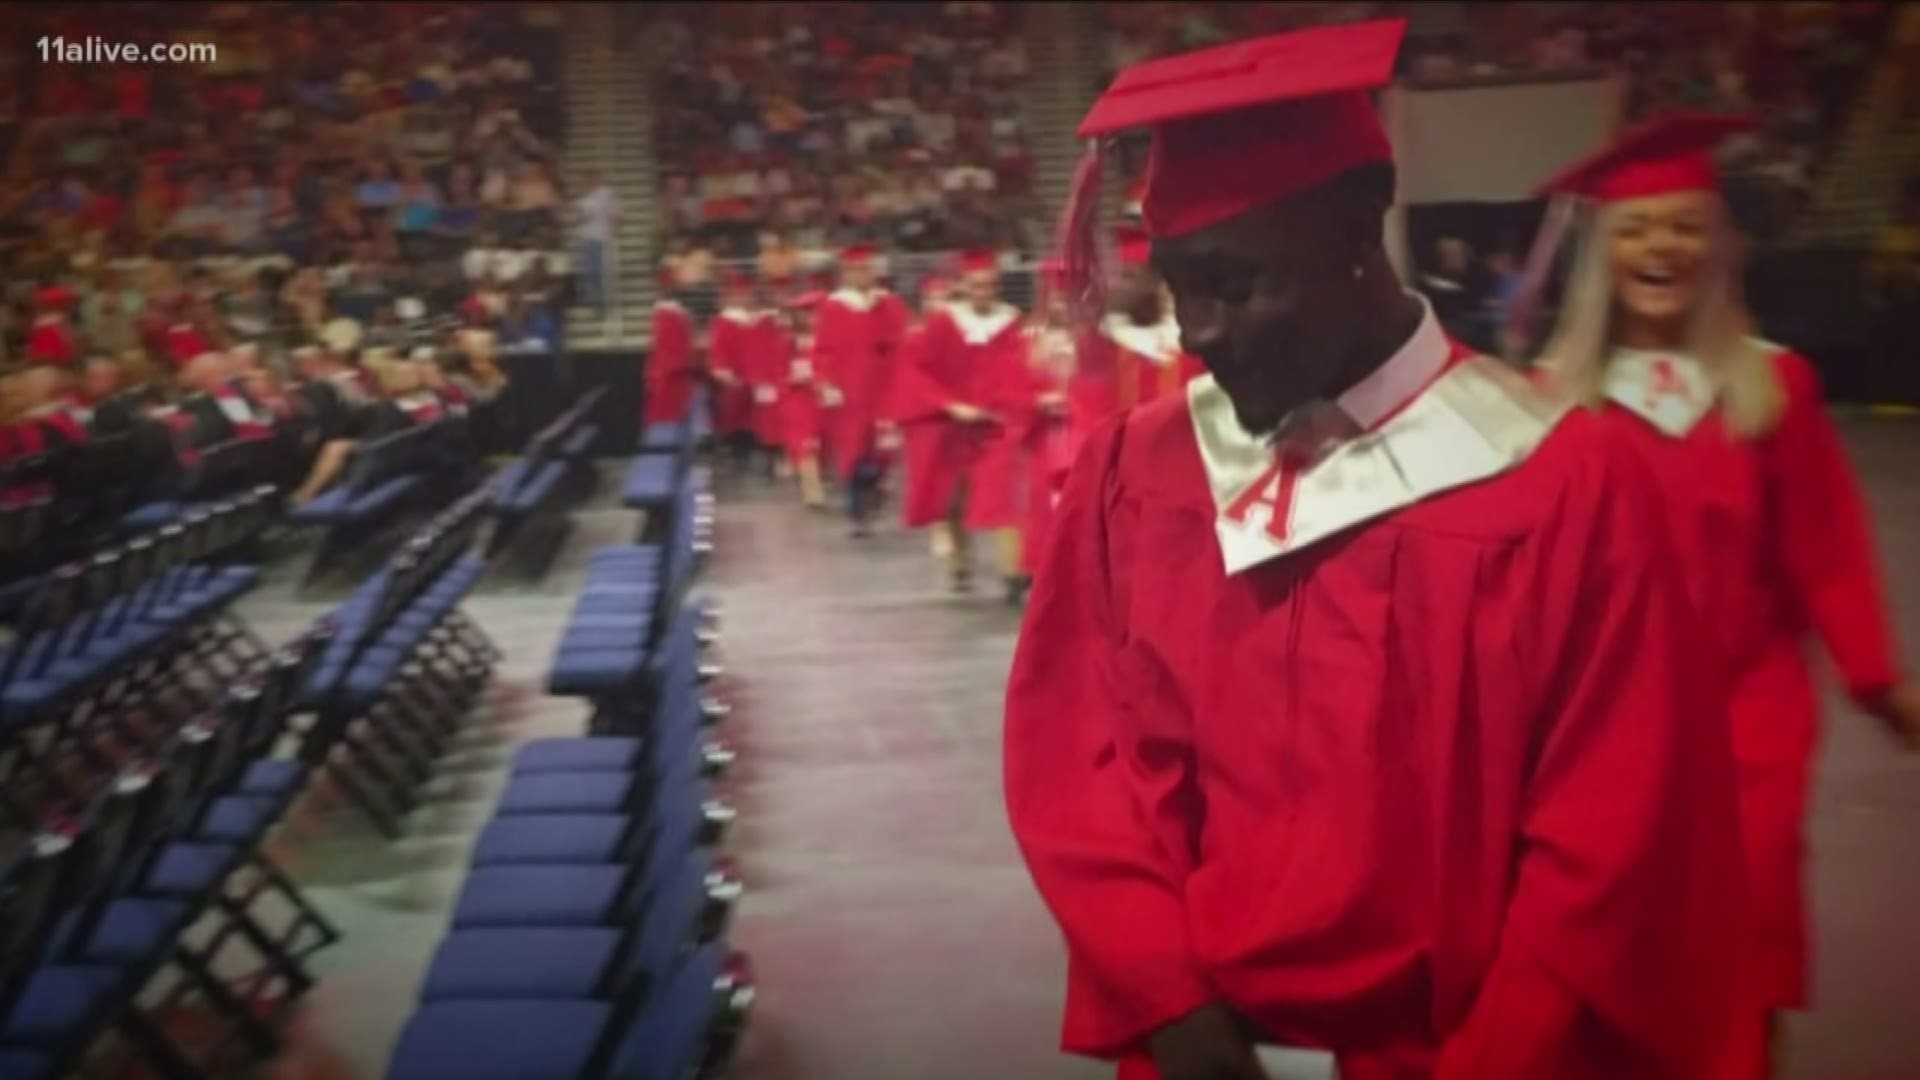 The family of the recent high school graduate said they believe he was shot over loud music.